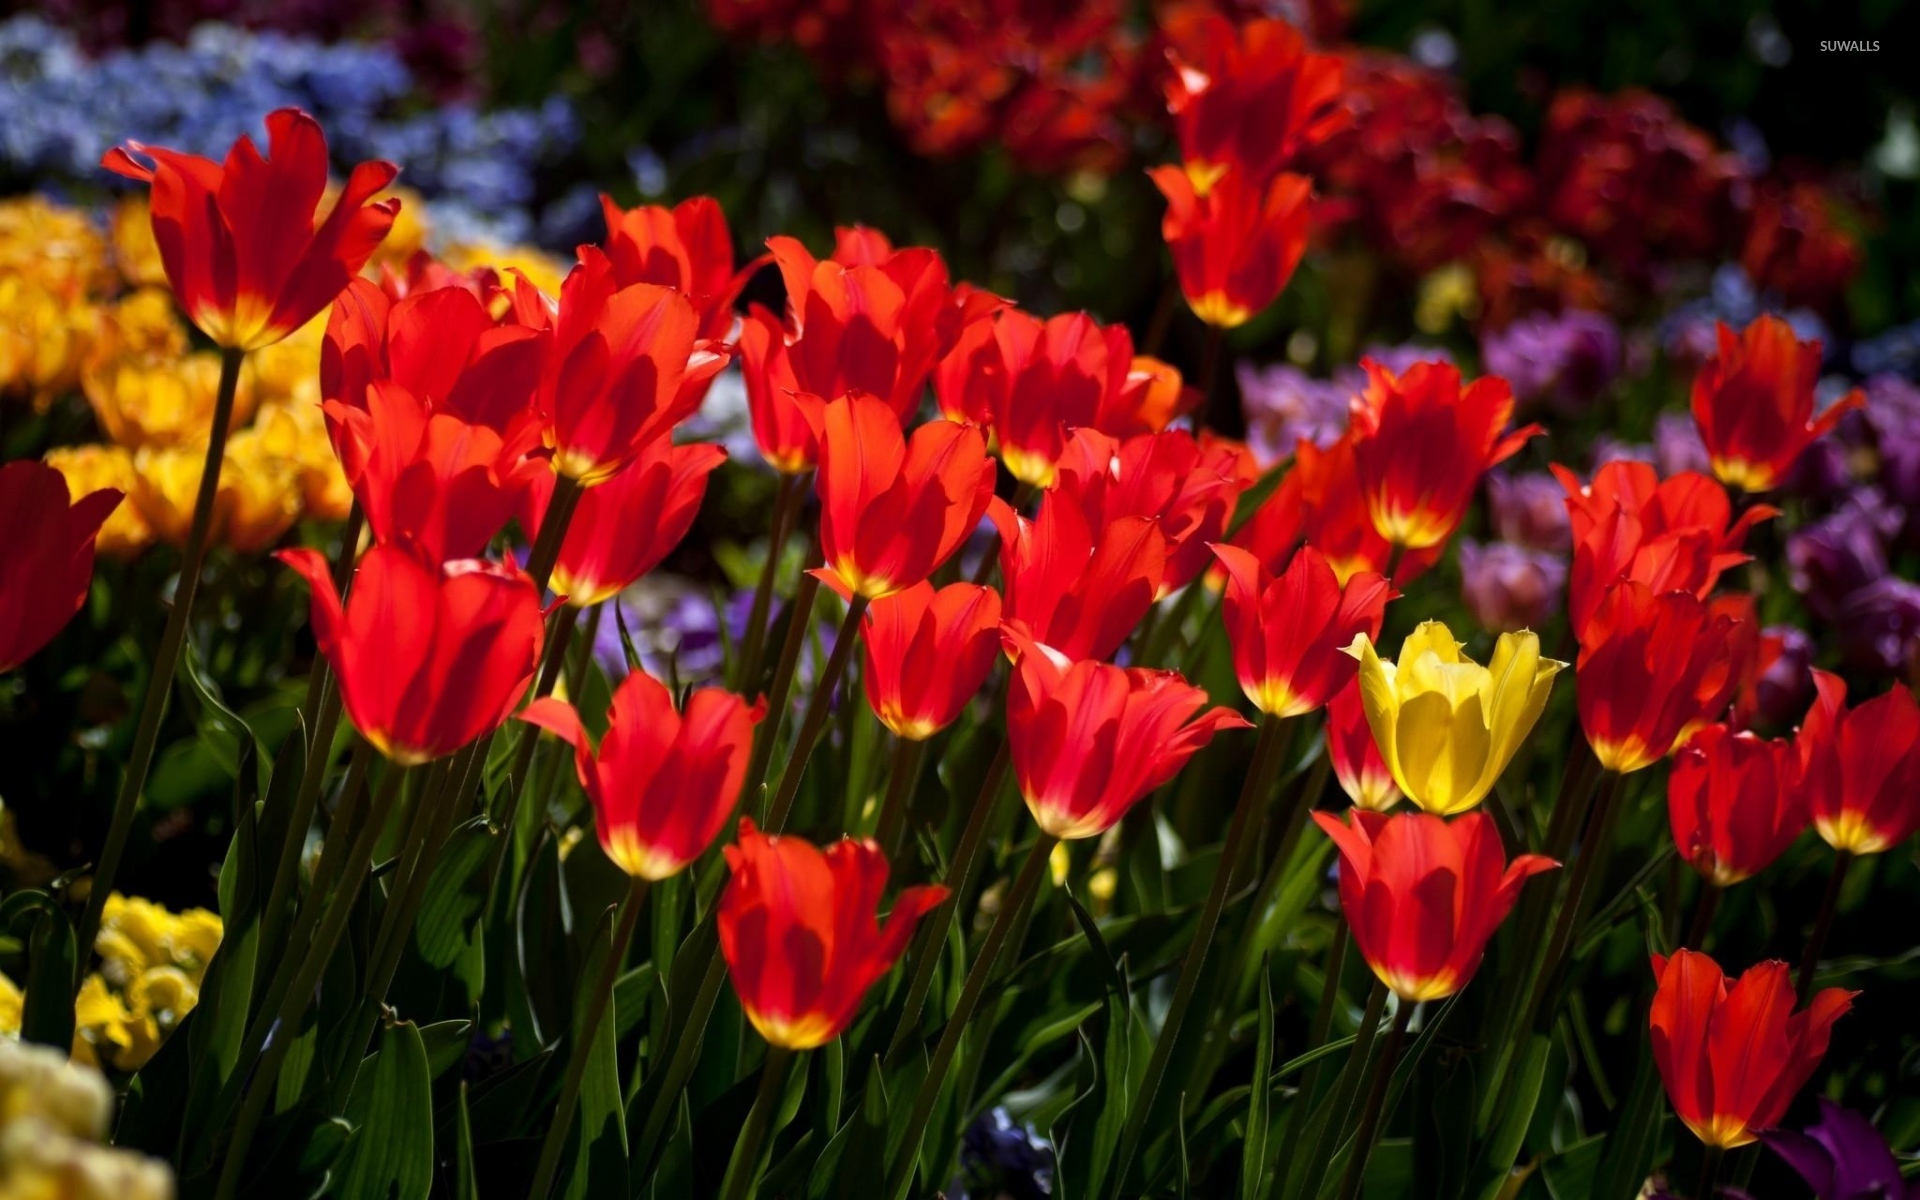 Red and yellow tulips wallpaper - Flower wallpapers - #40246